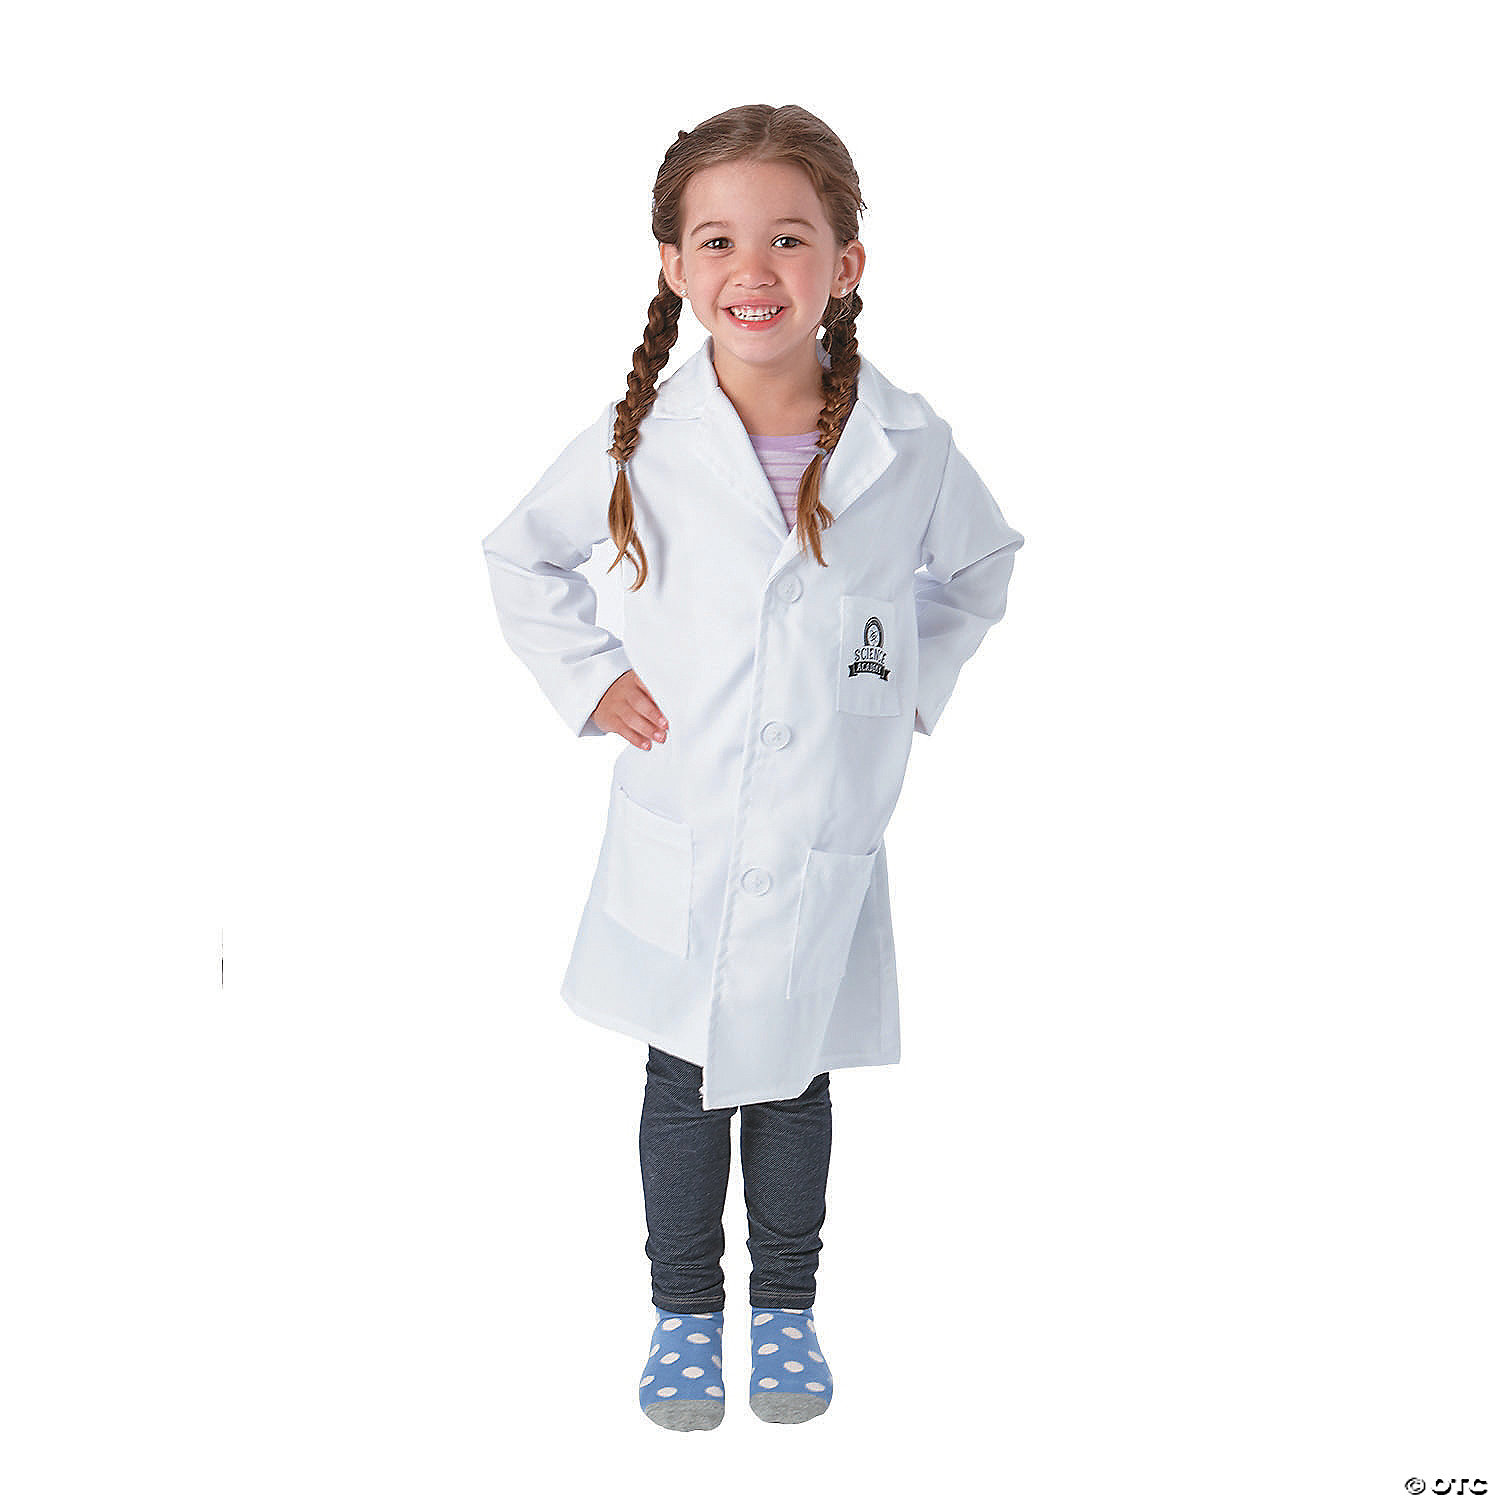 15 PC Lab Coat For Kids & Scientist Costume Ages 5 9 FREE SHIPPING 